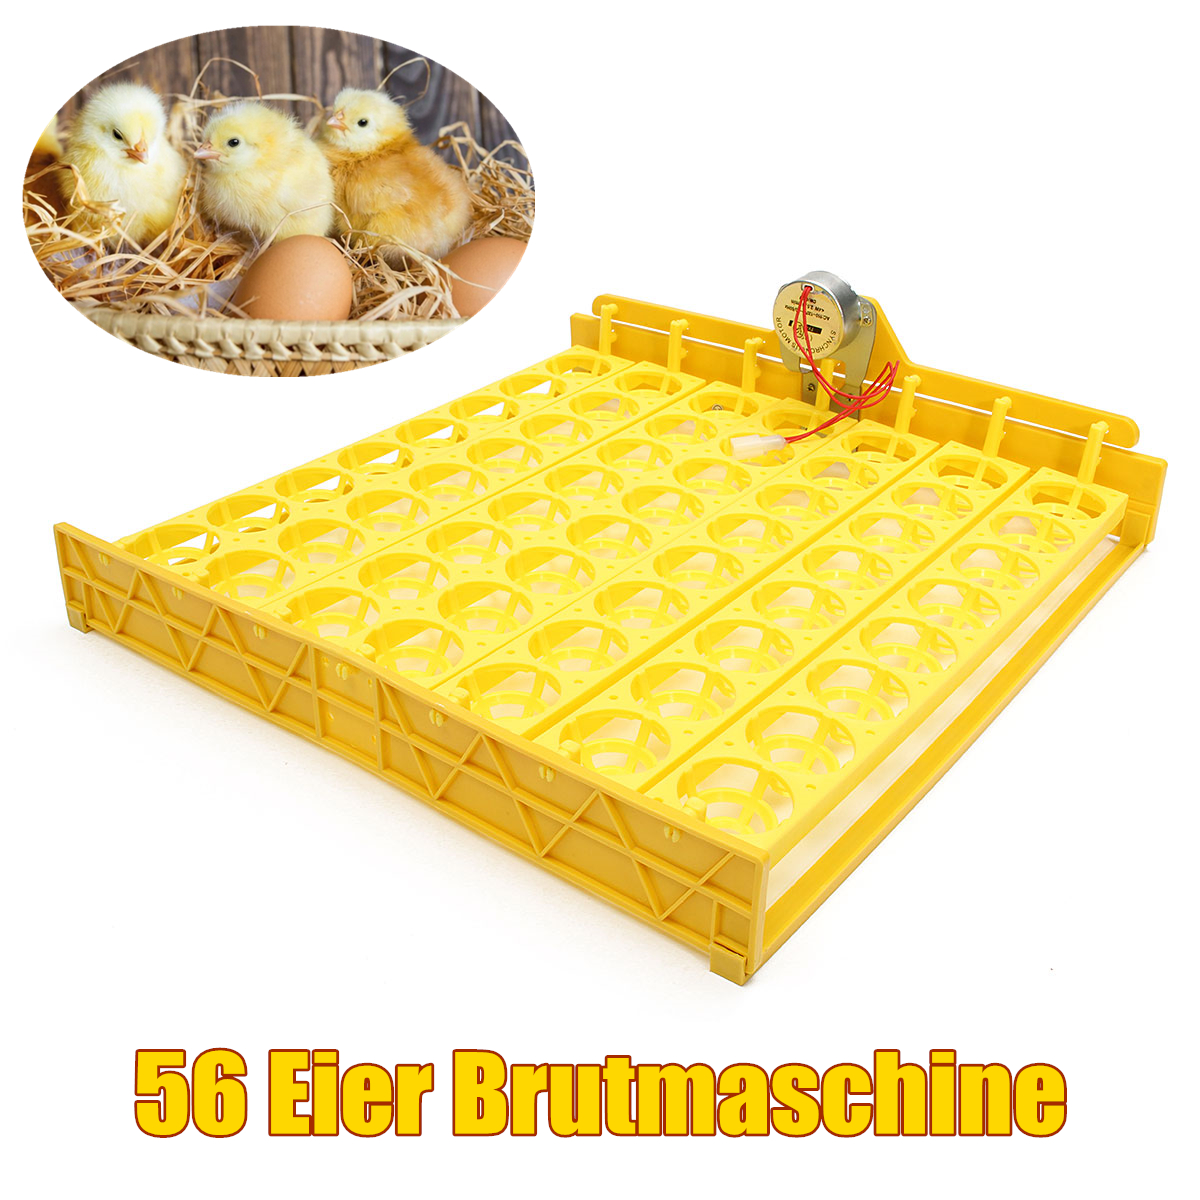 Automatic-Egg-Incubator-56-Eggs-Turner-Tray-Chicken-Quail-Duck-With-110V220V-1633269-1